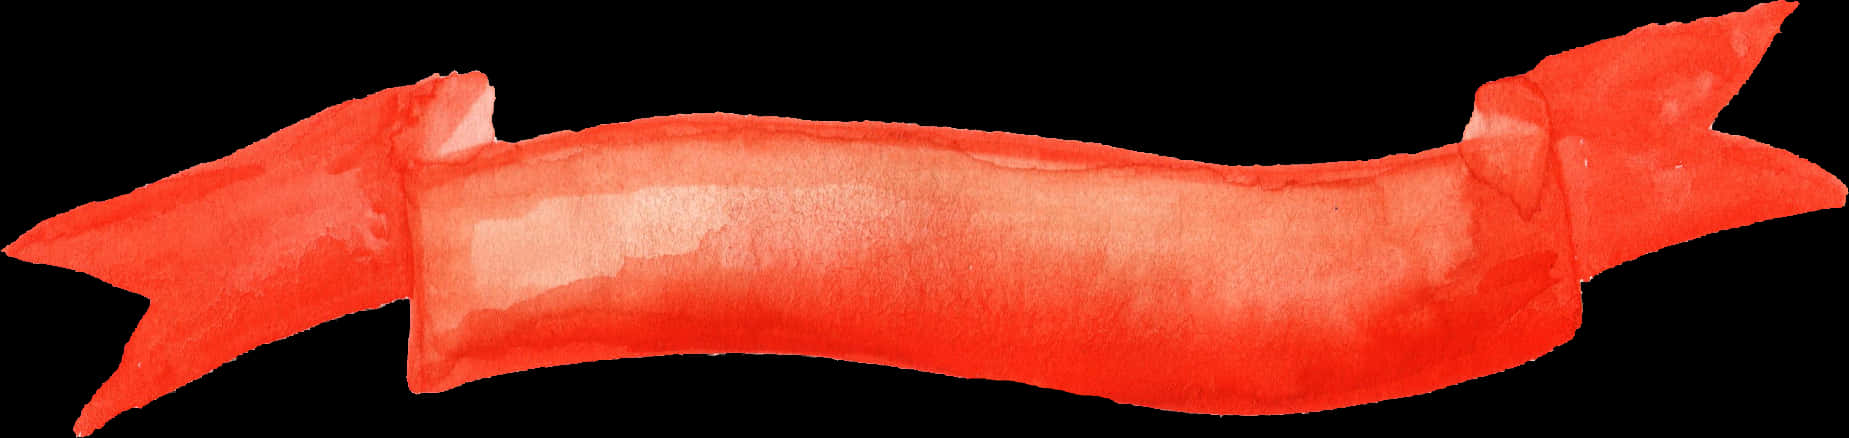 A Close-up Of A Red Object